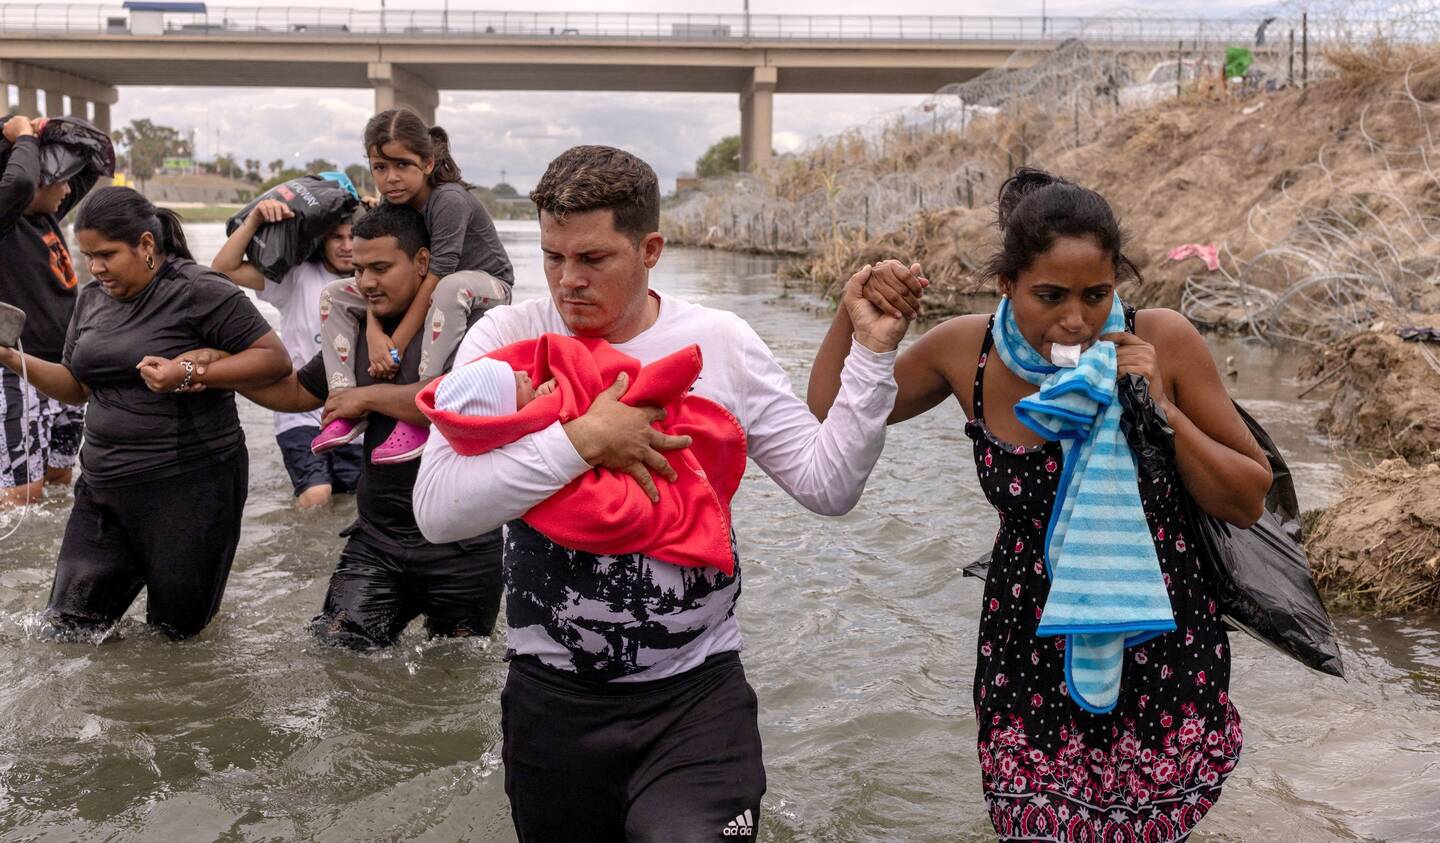 Yusniel, a migrant from Cuba, holds his 10-day-old son, Yireht, and wife, Yanara, along the banks of the Rio Grande after wading into the United States from Mexico at Eagle Pass, Texas, on Oct. 6, 2023 (OSV News photo/Adrees Latif, Reuters)